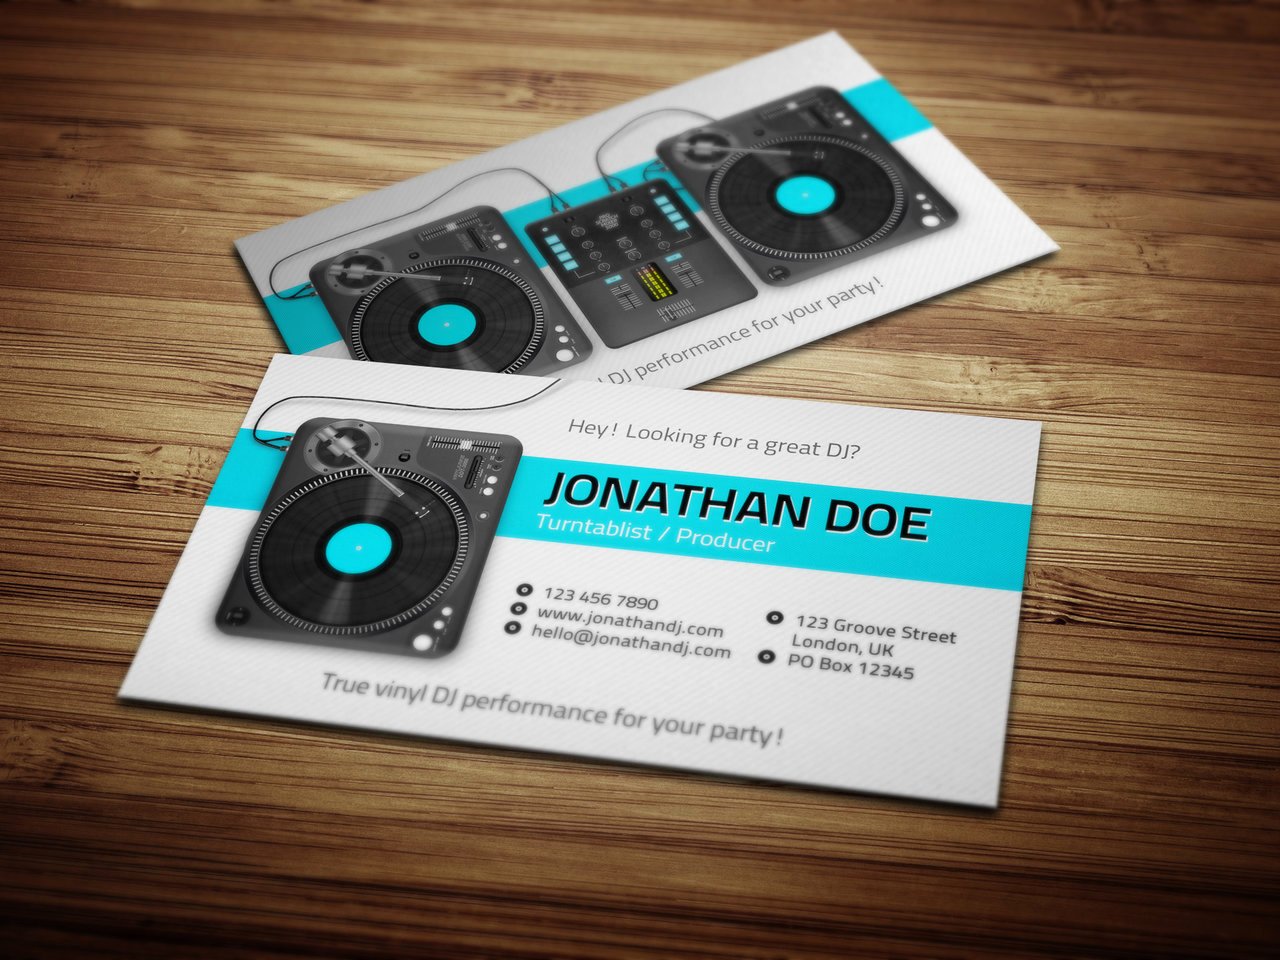 Dj Business Card Template Unique Your Questions What Do I Need to Set Up Legally as A Dj